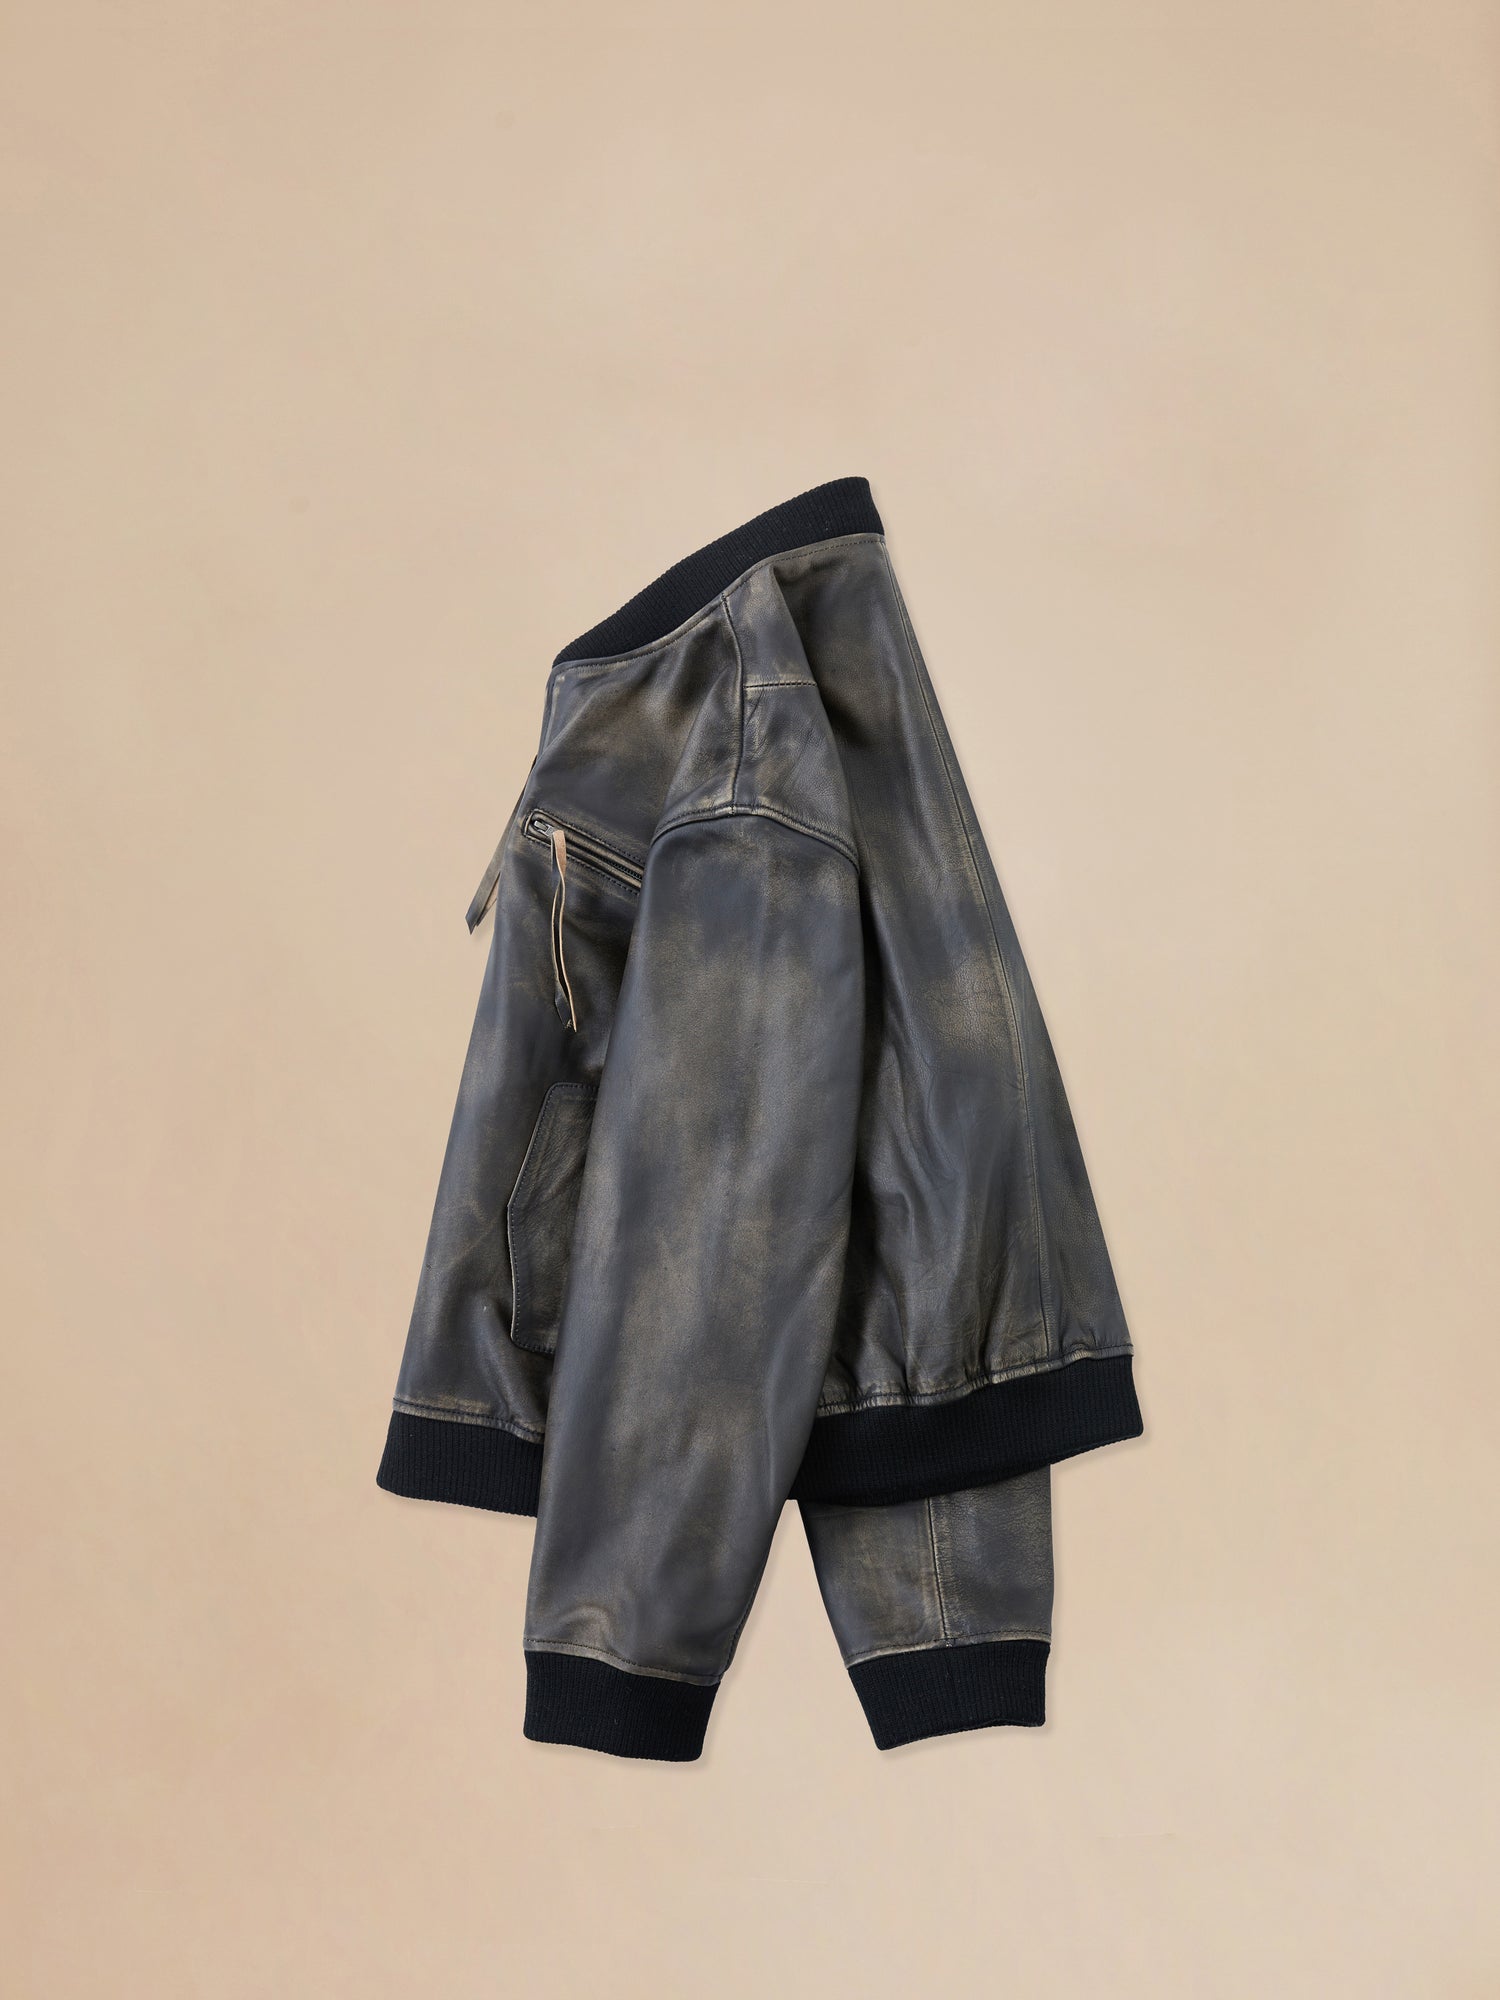 A pair of Distressed Pavement Leather Bomber Jacket by Found on a beige surface.